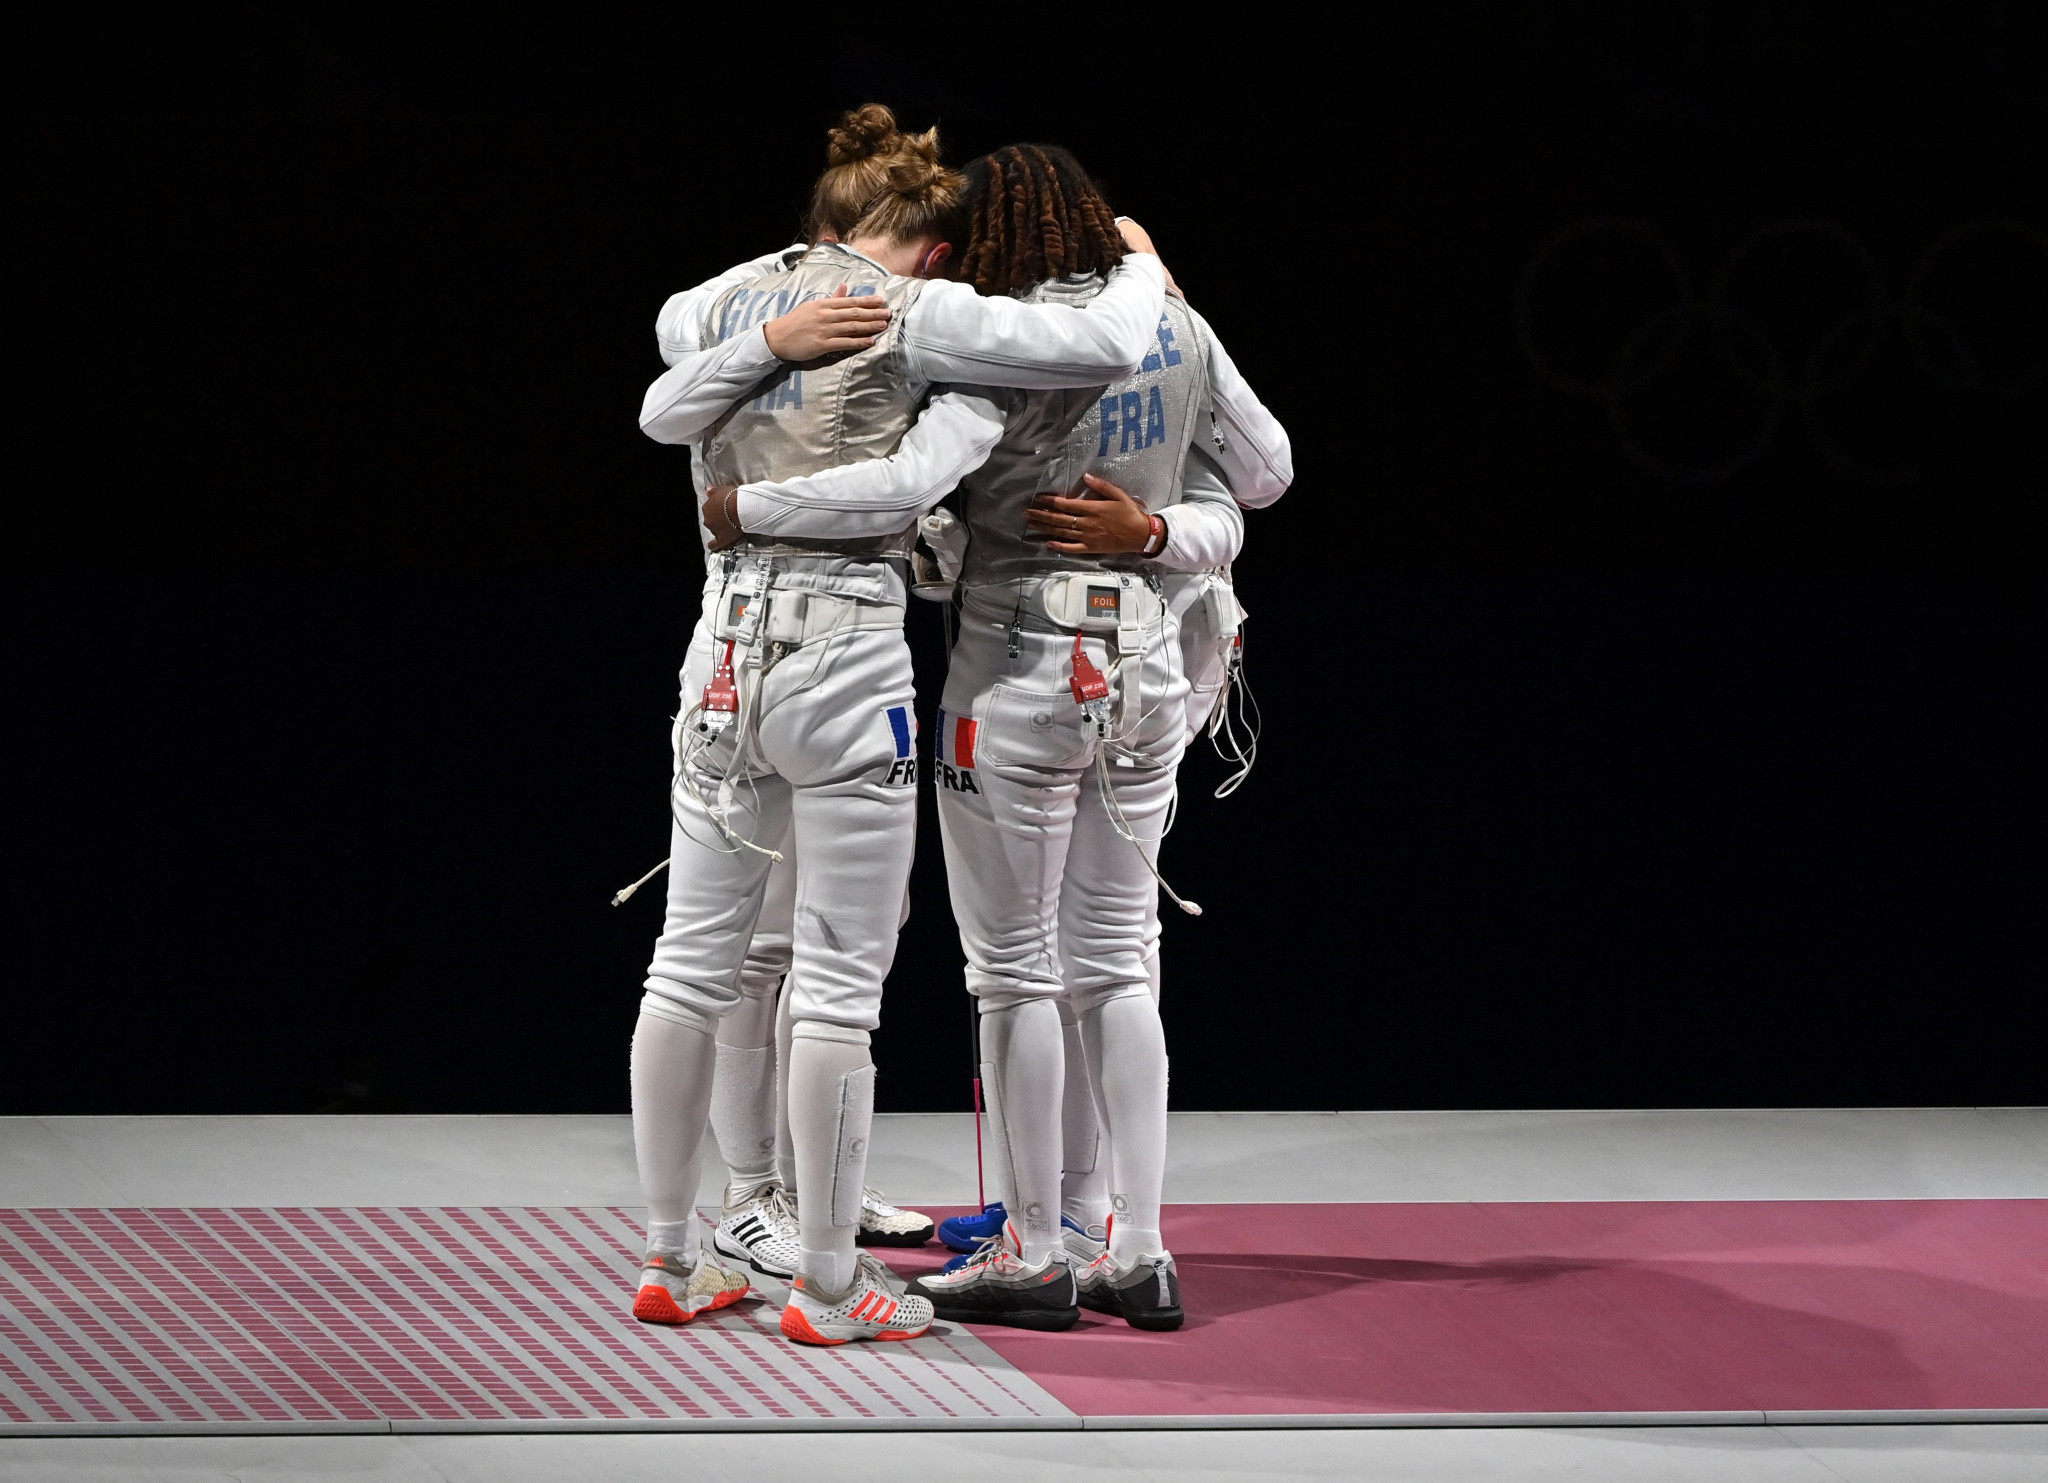 France won the women's foil title at the Fencing World Championships today ©Getty Images